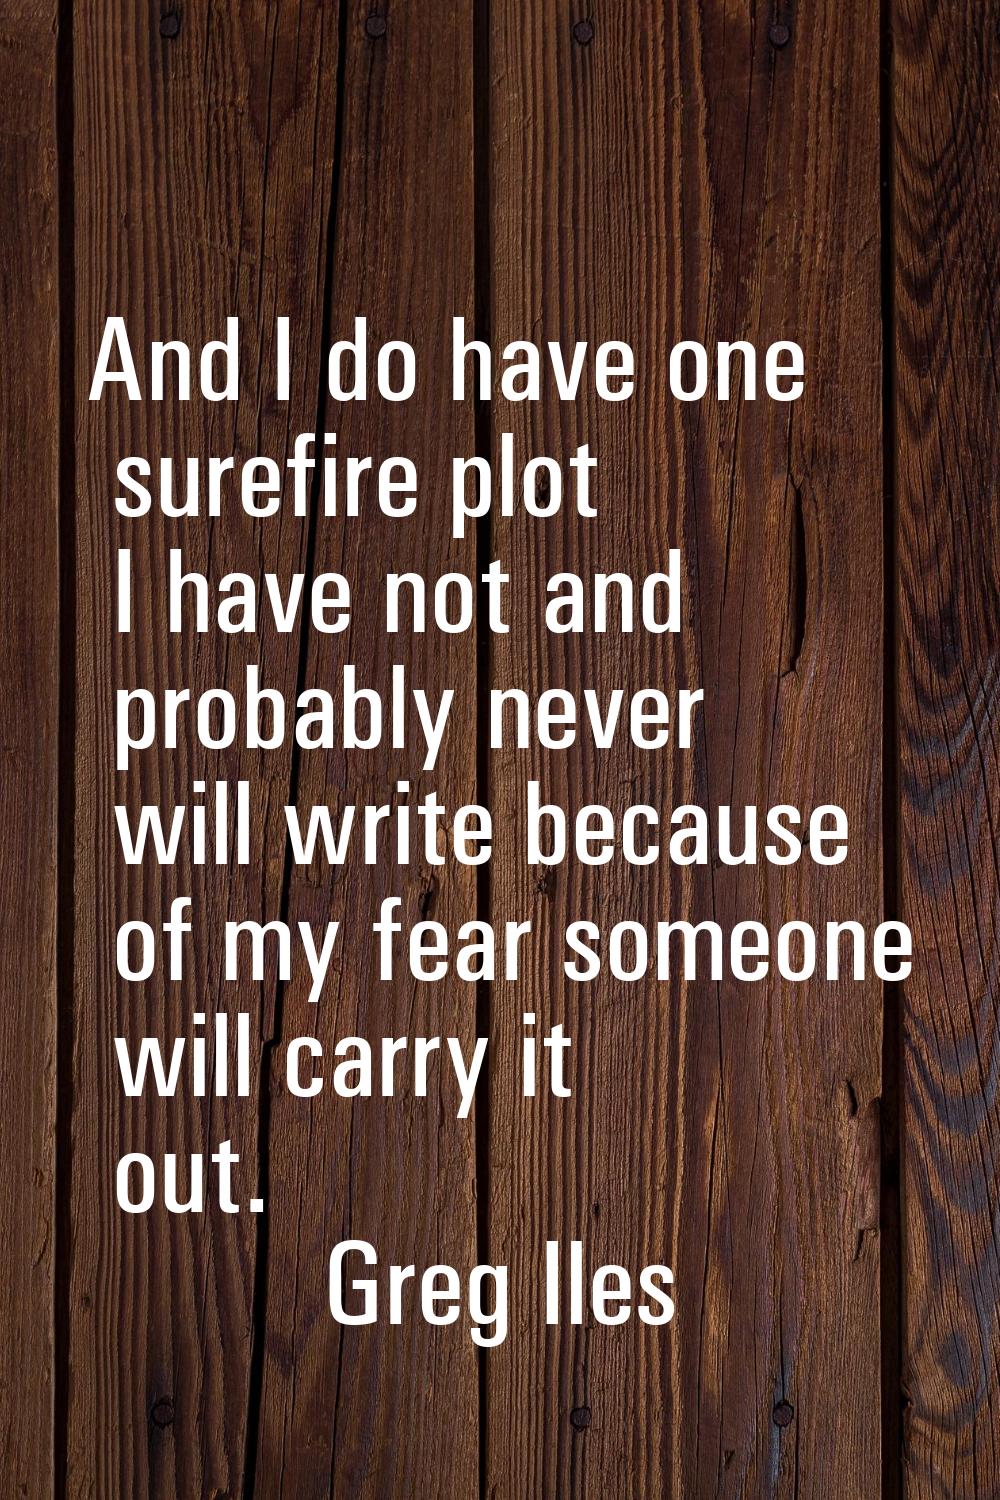 And I do have one surefire plot I have not and probably never will write because of my fear someone